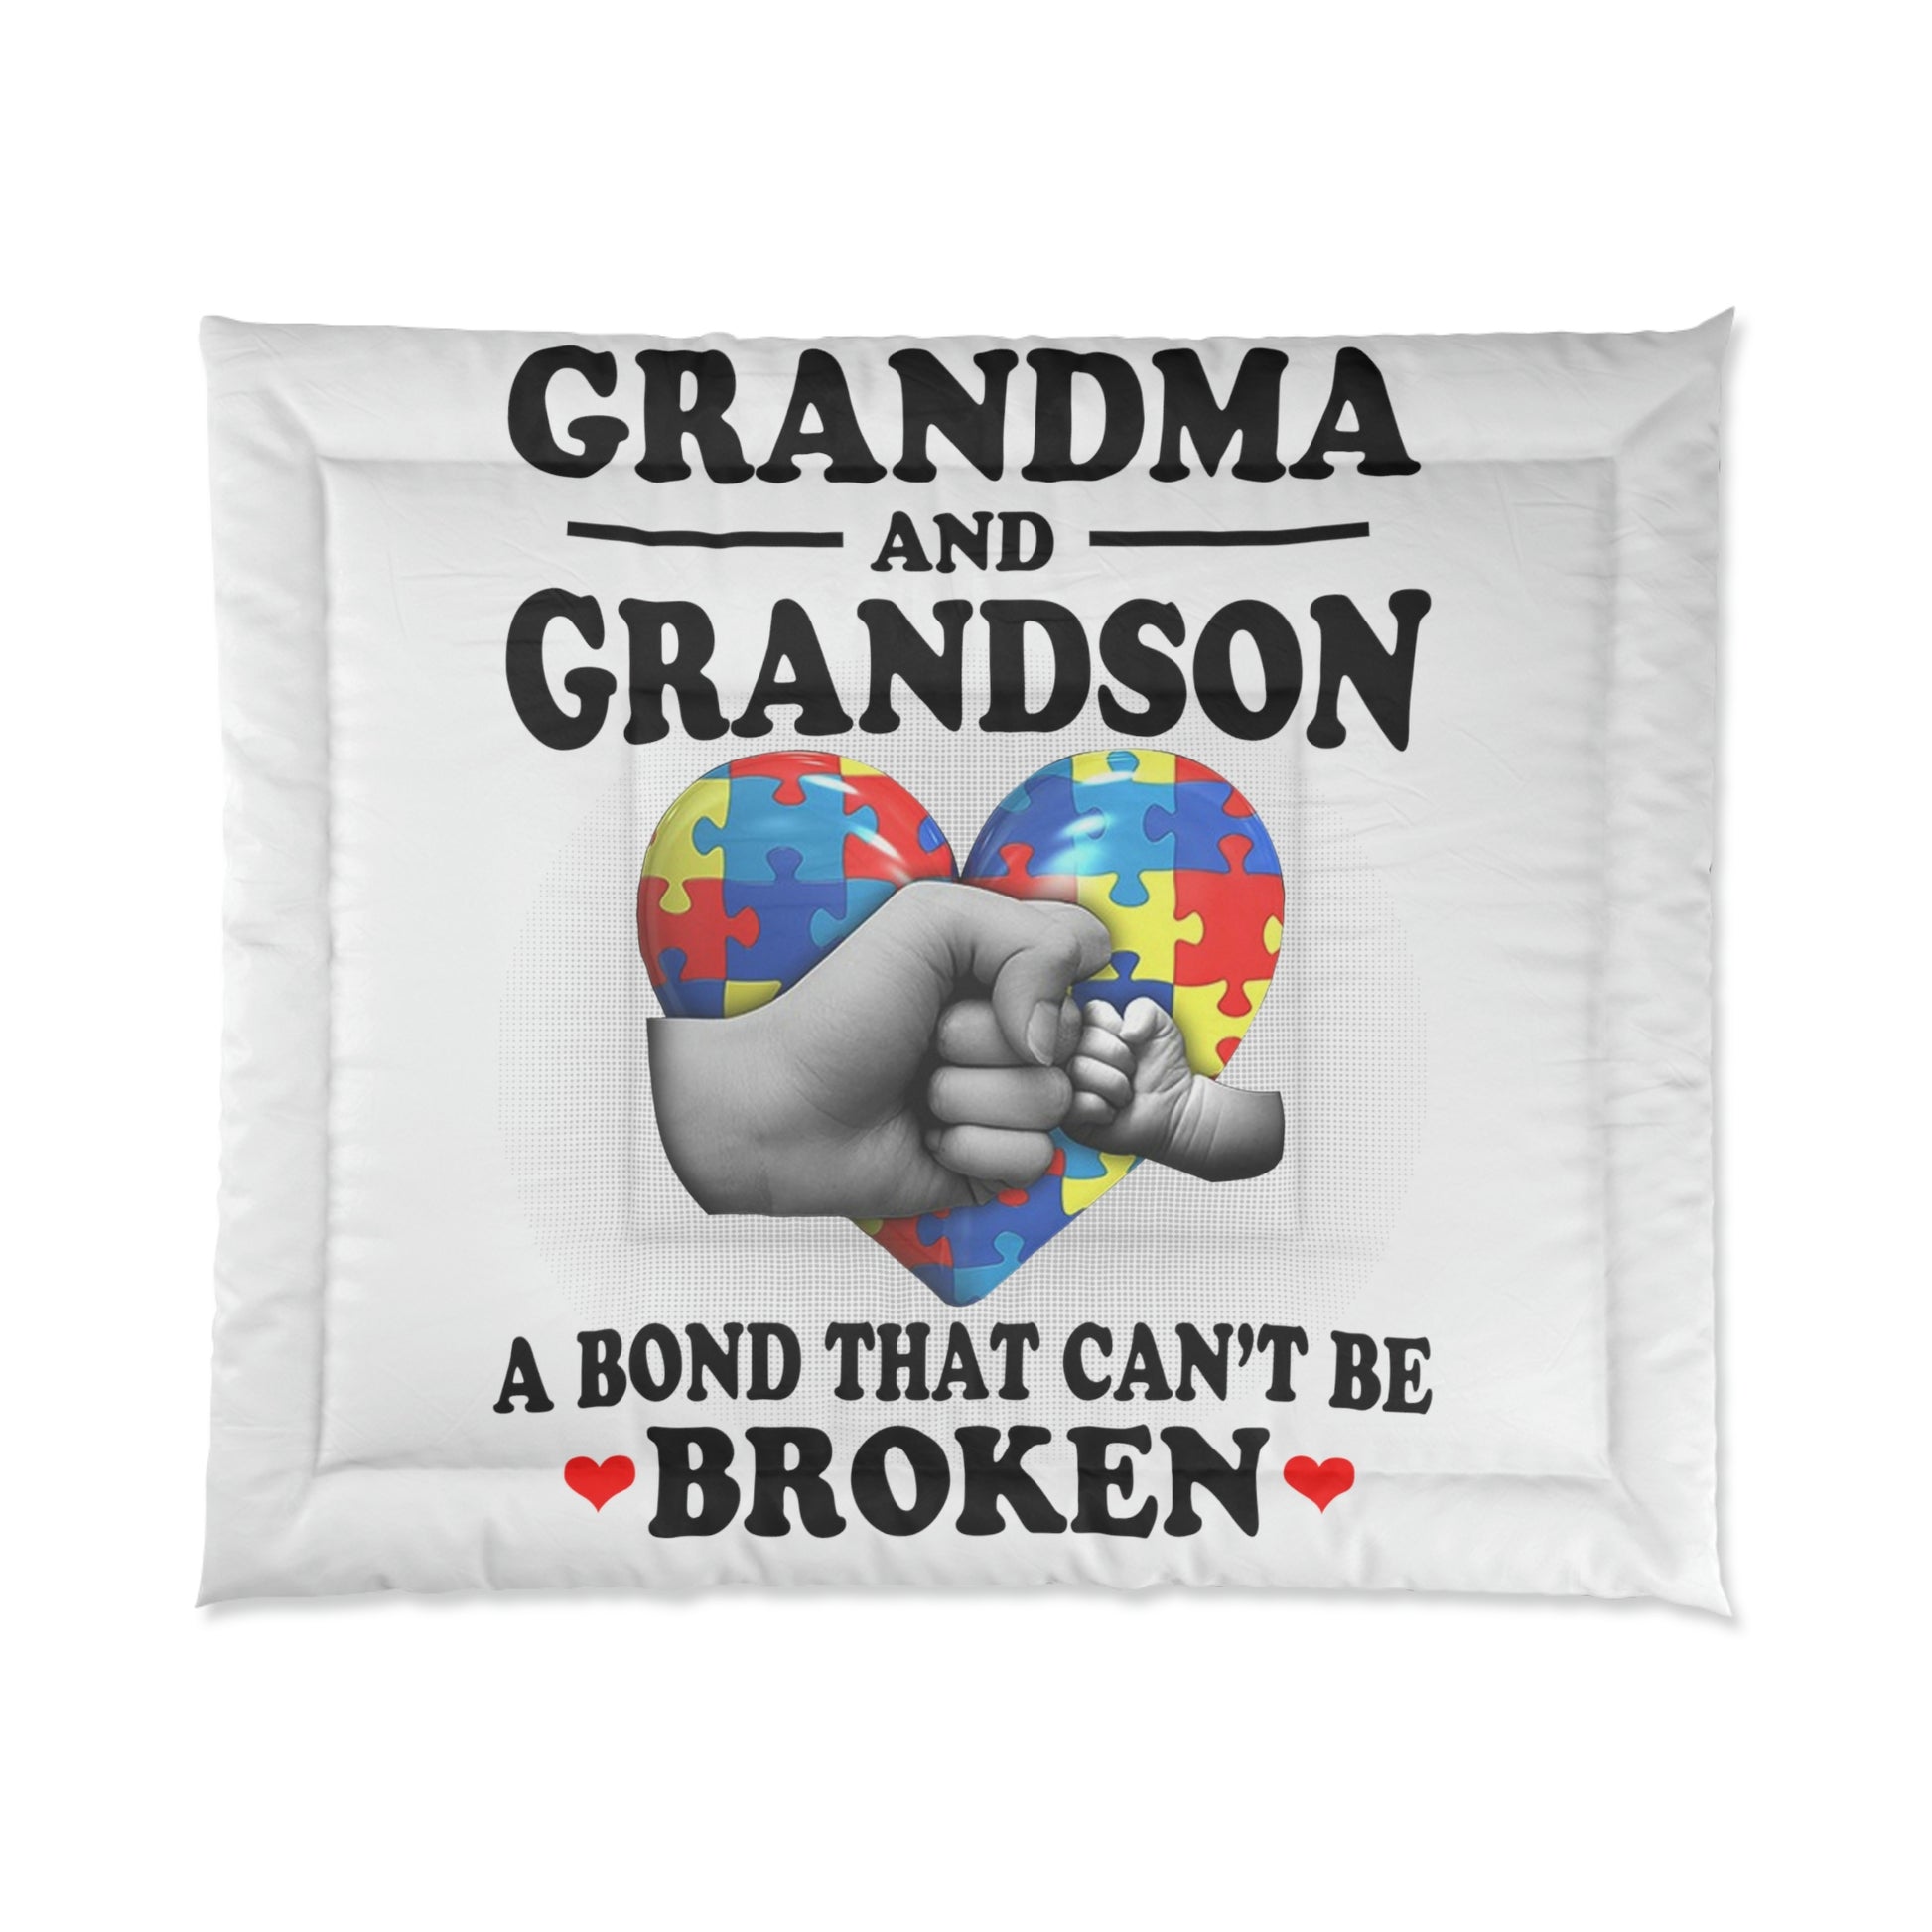 Comforter Grandma and Grandson Bond, Gift for Mom, Special moment - Digital By M&B